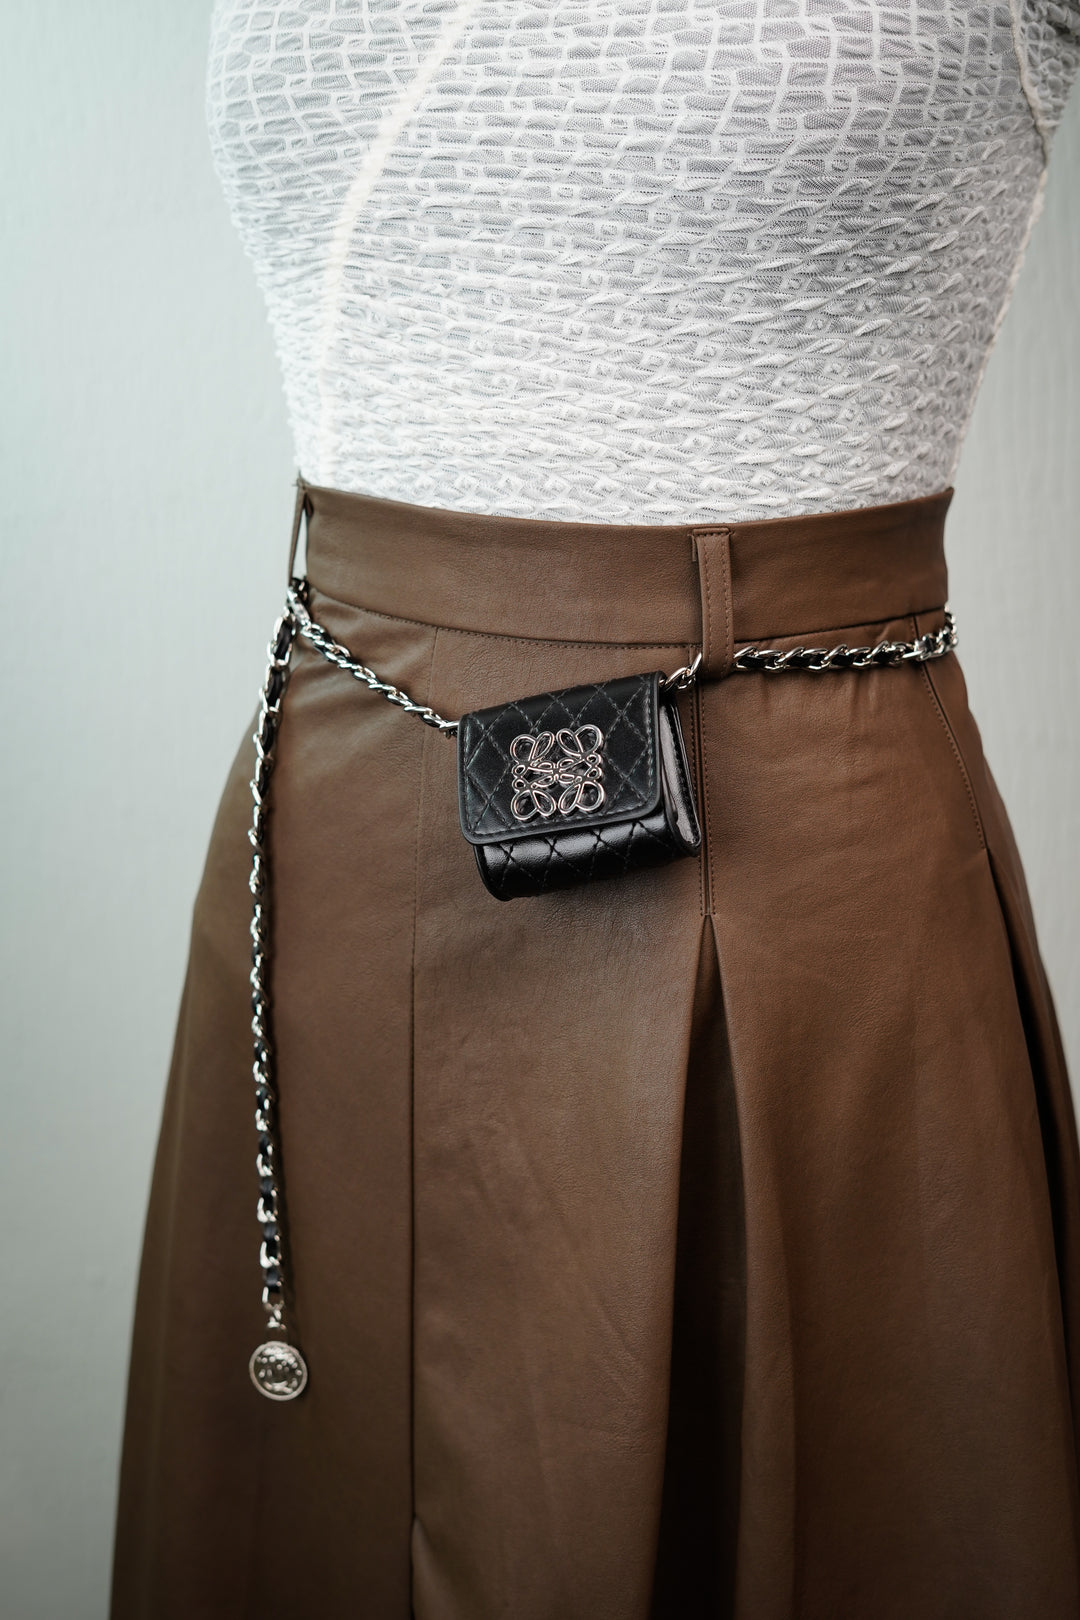 Dress Up Your Waistline Chain Belt with Attached Mini Satchel